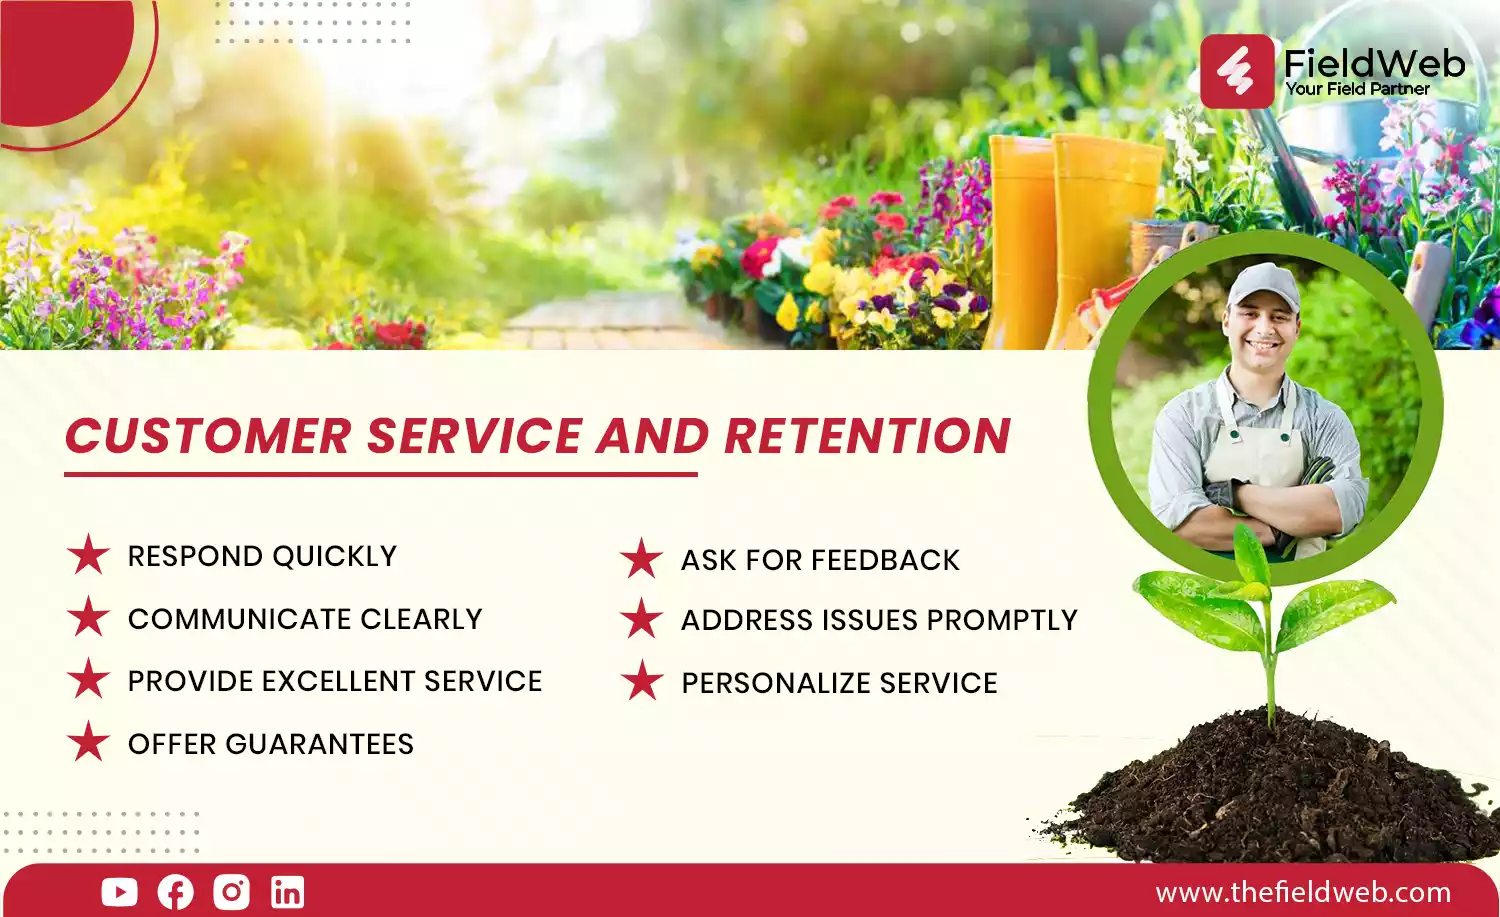 image is displaying several pointers of customer service and retention for lawn and gardening services